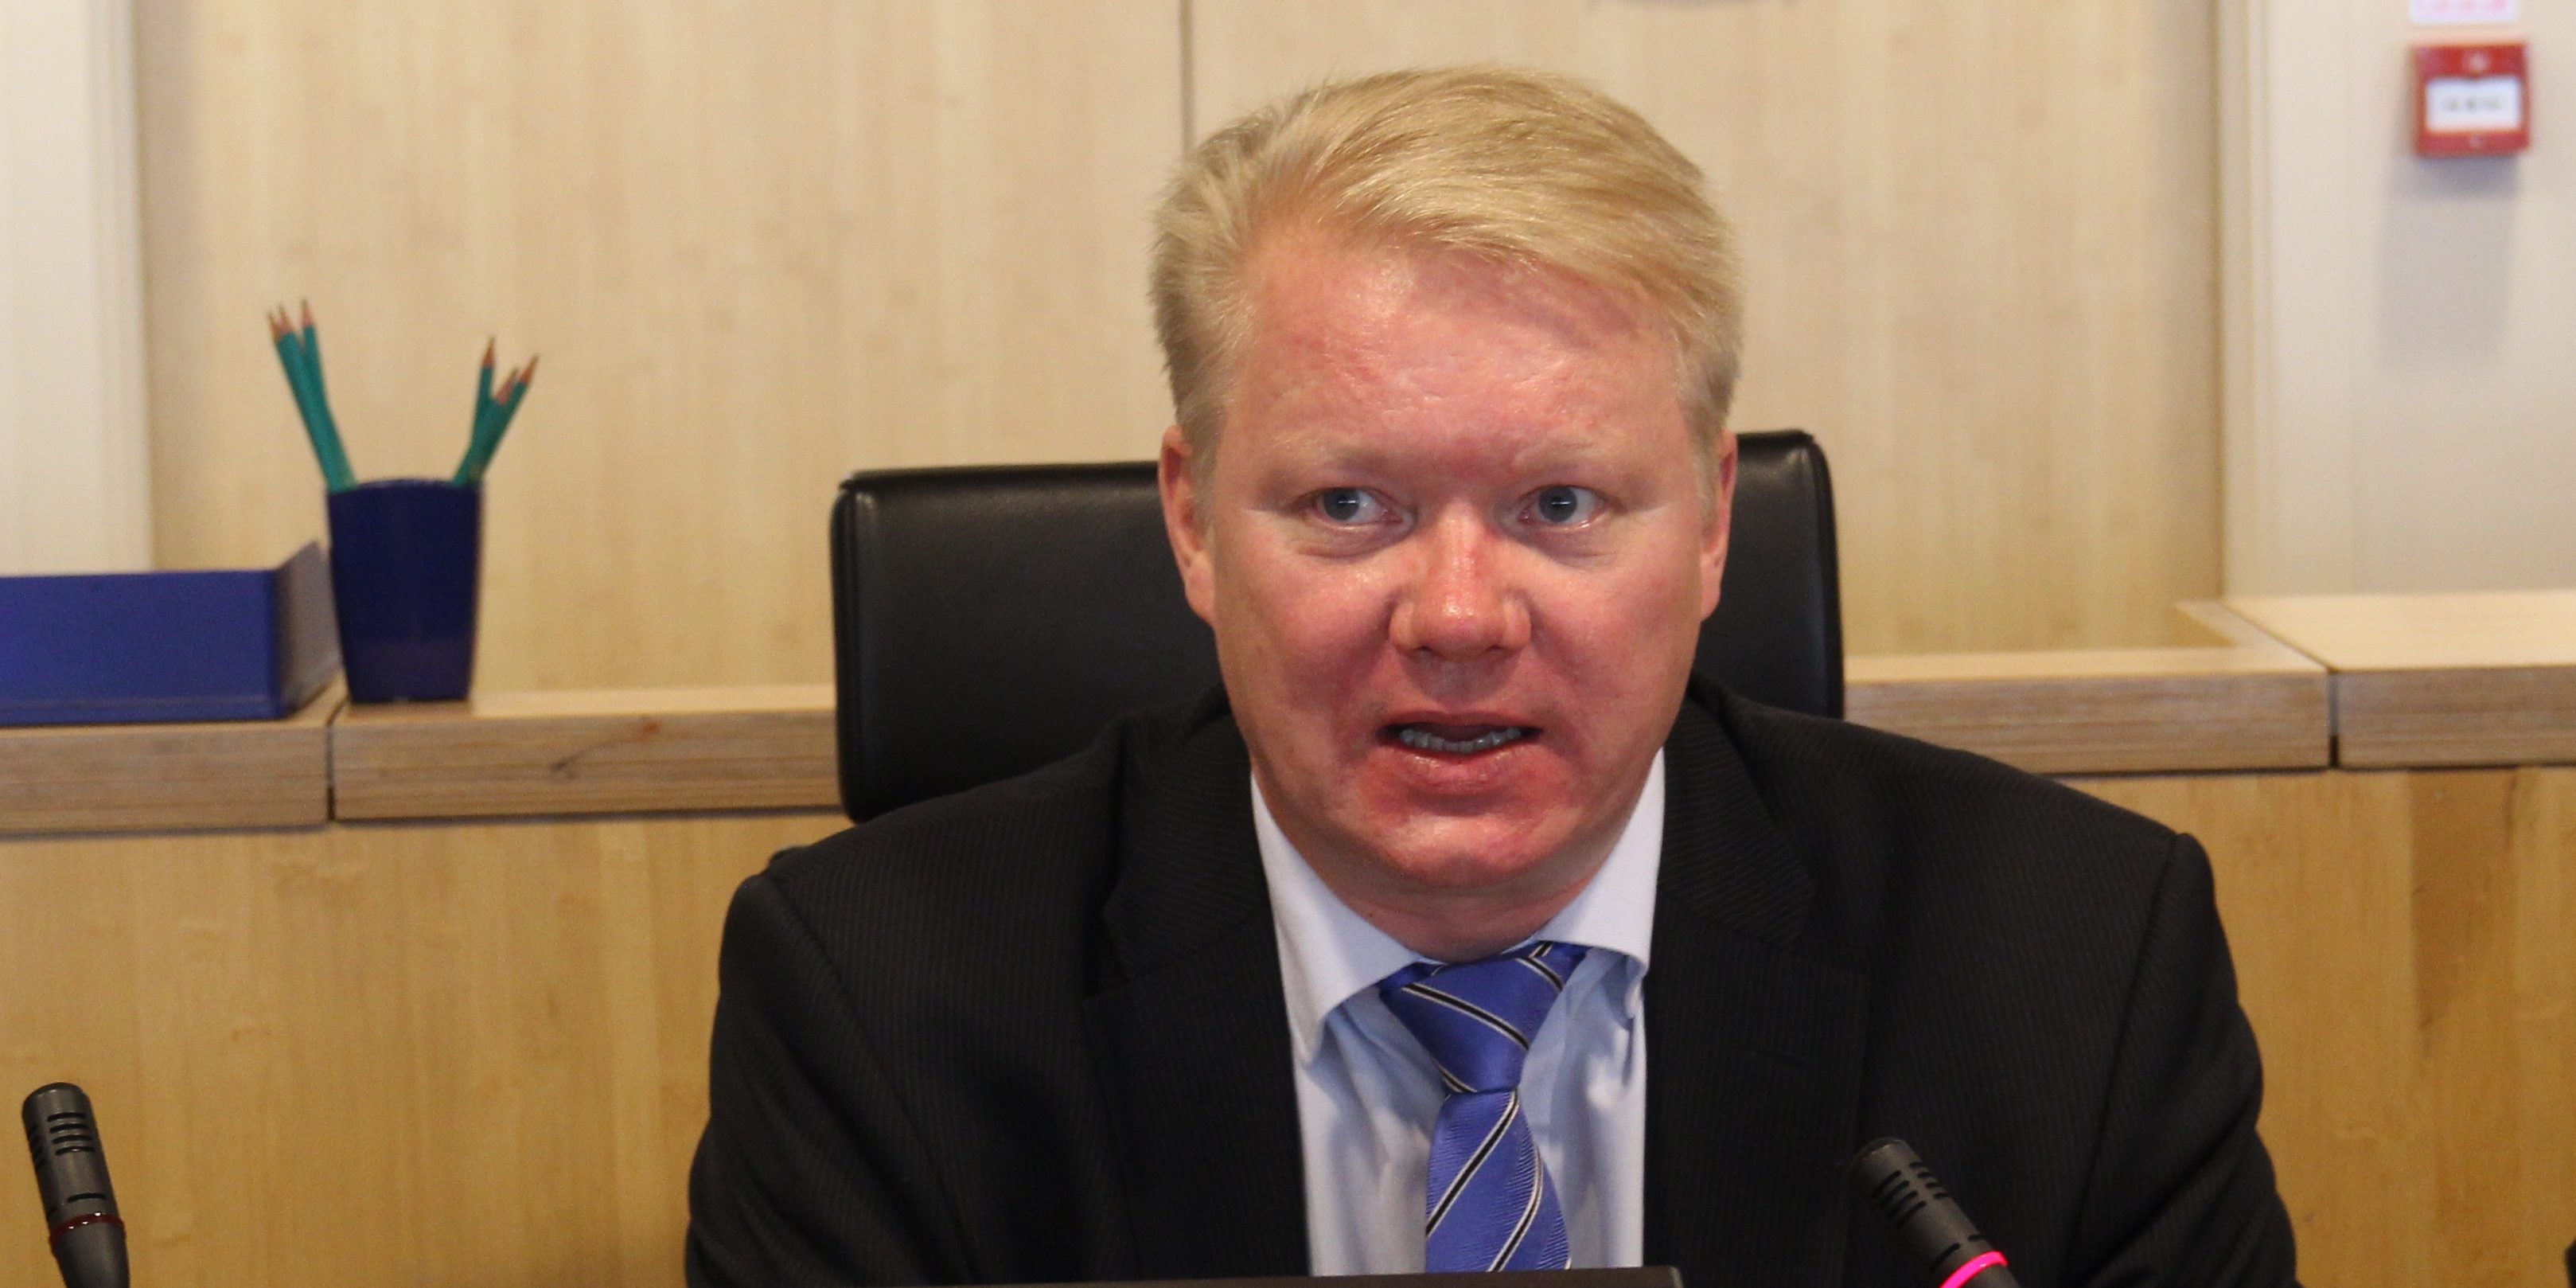 Martikainen elected new chair of Natural Resources Commission